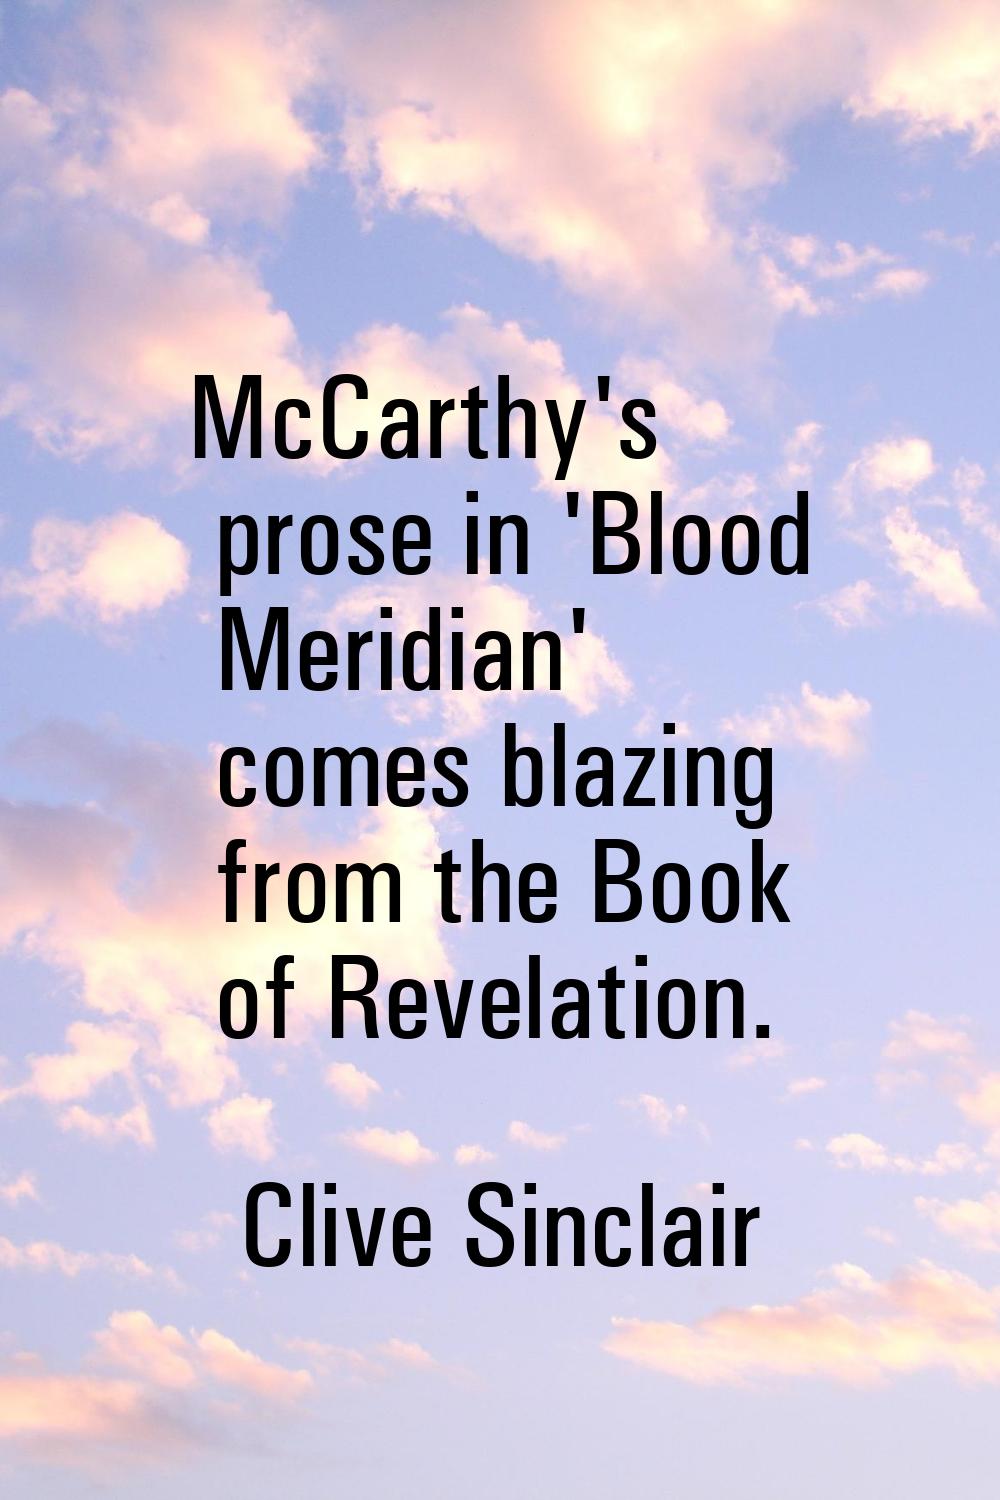 McCarthy's prose in 'Blood Meridian' comes blazing from the Book of Revelation.